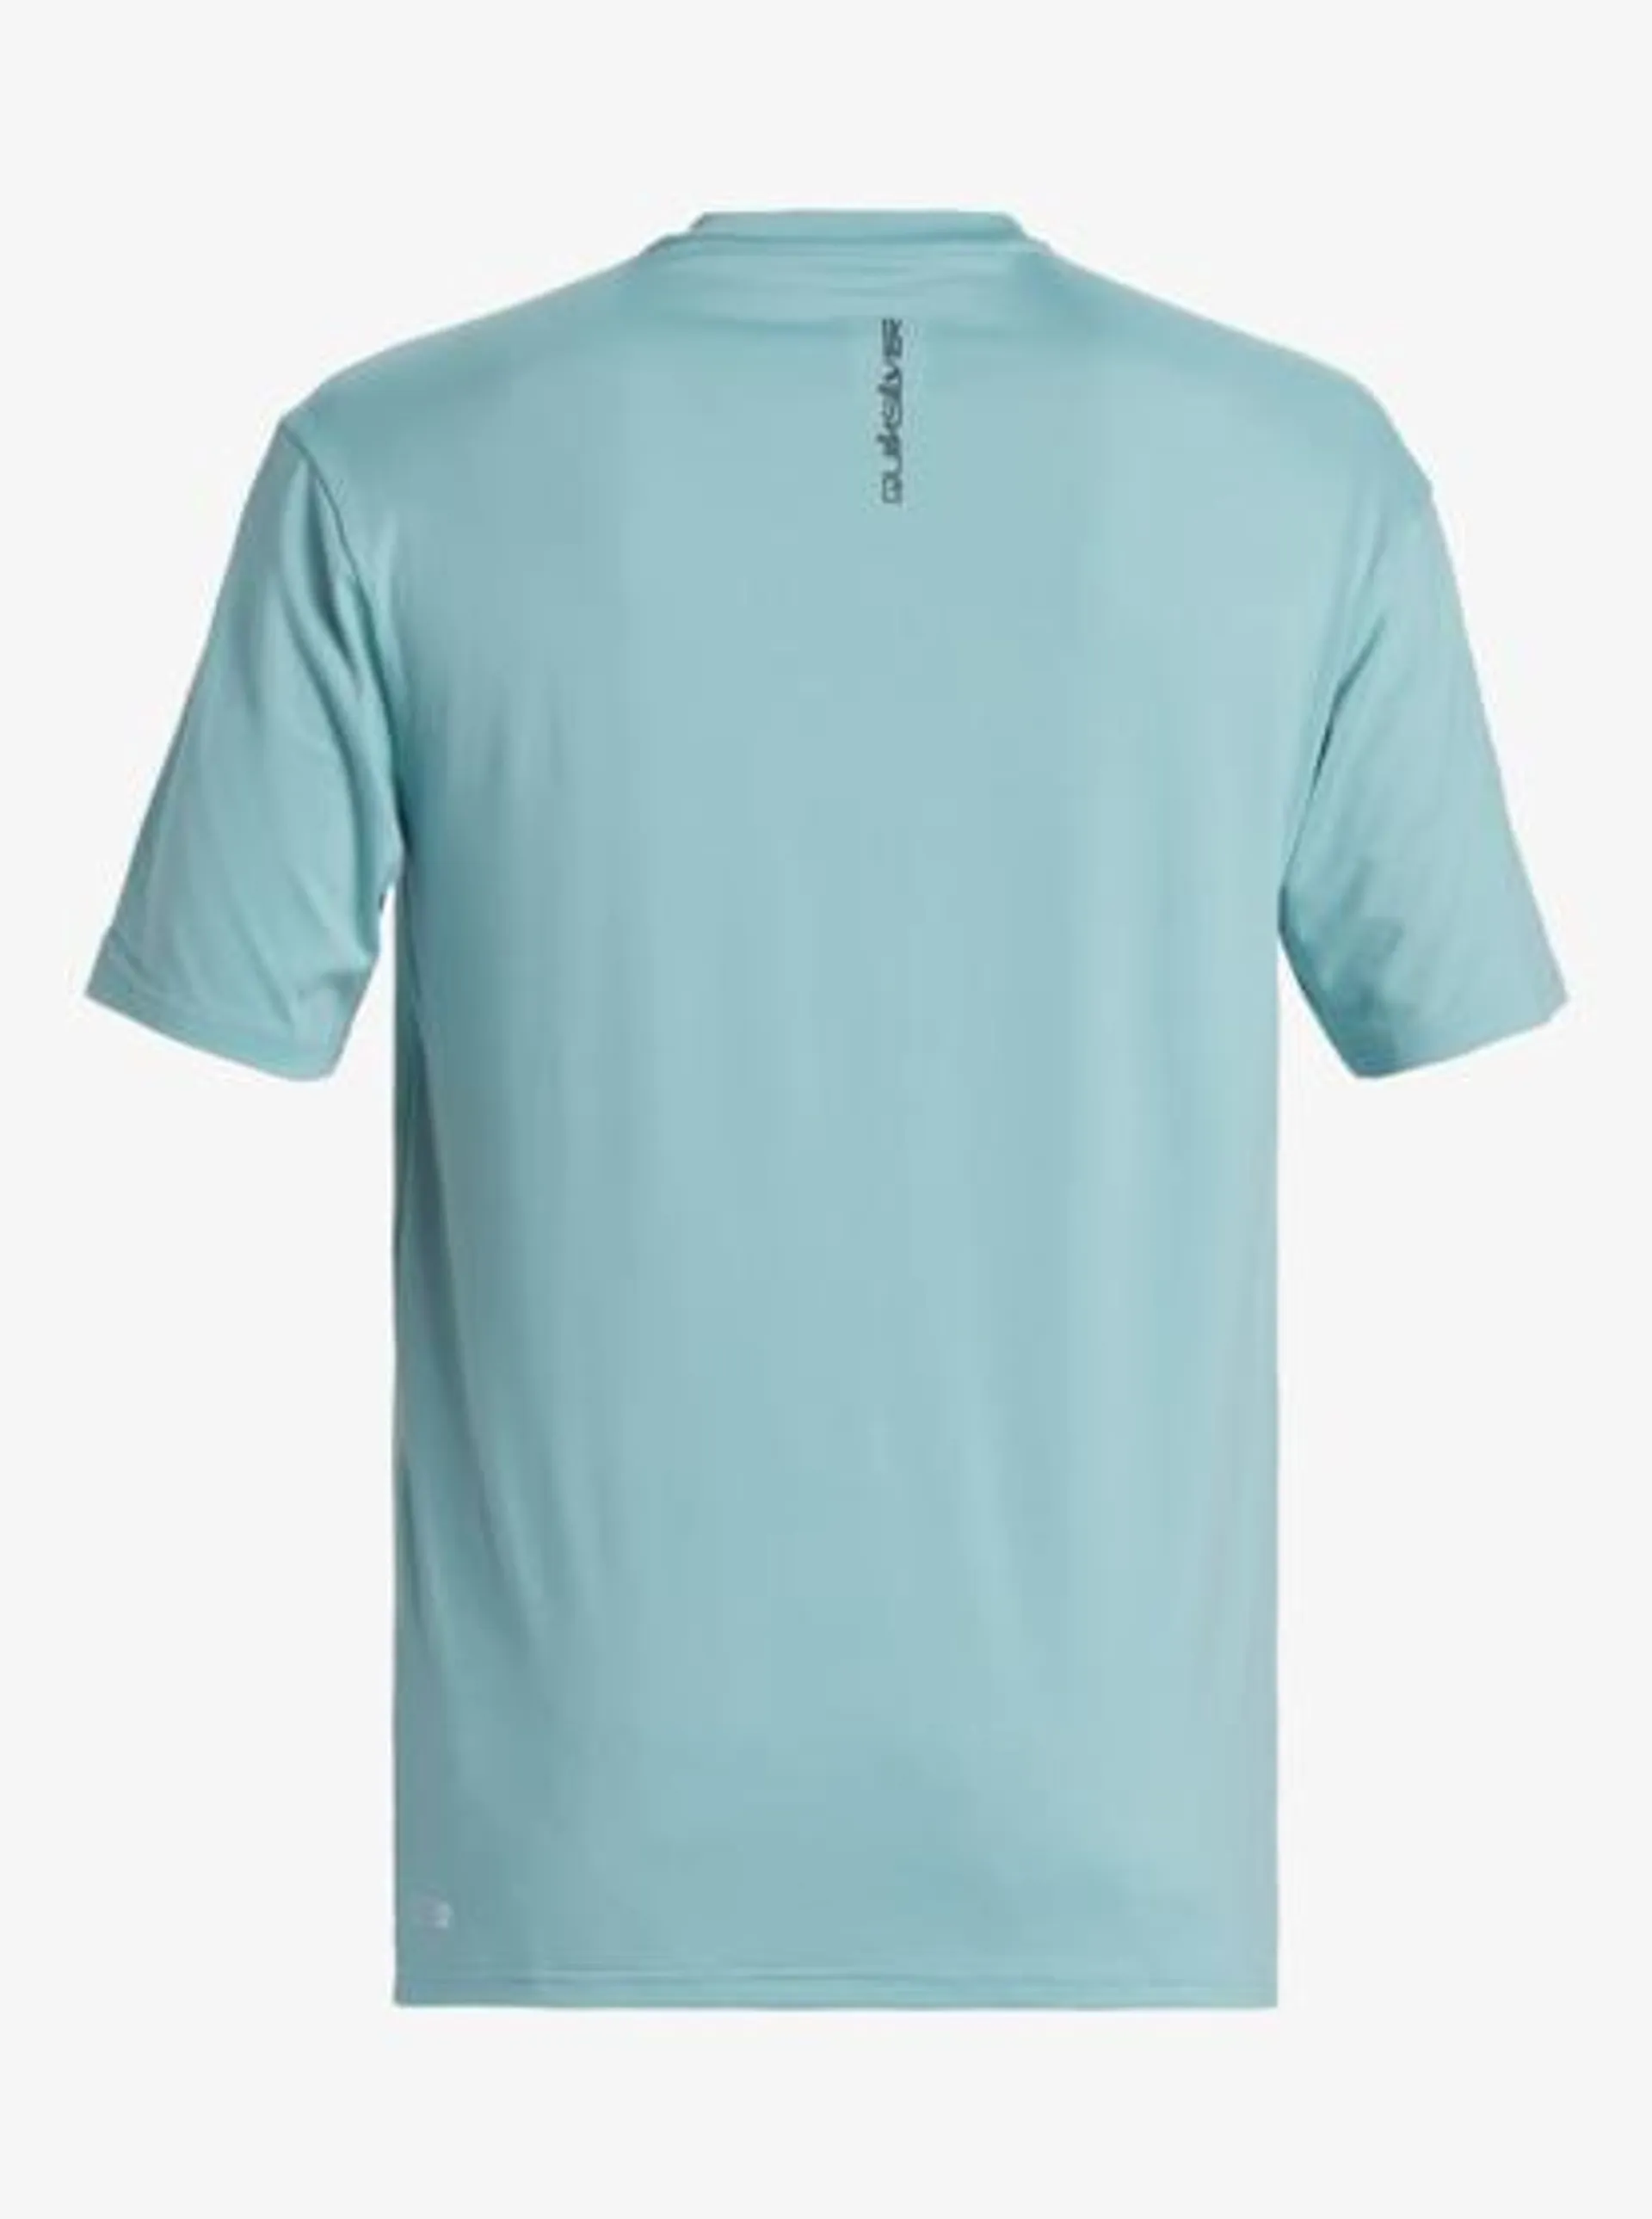 Everyday Surf - Surf-tee manches courtes UPF 50 pour Homme